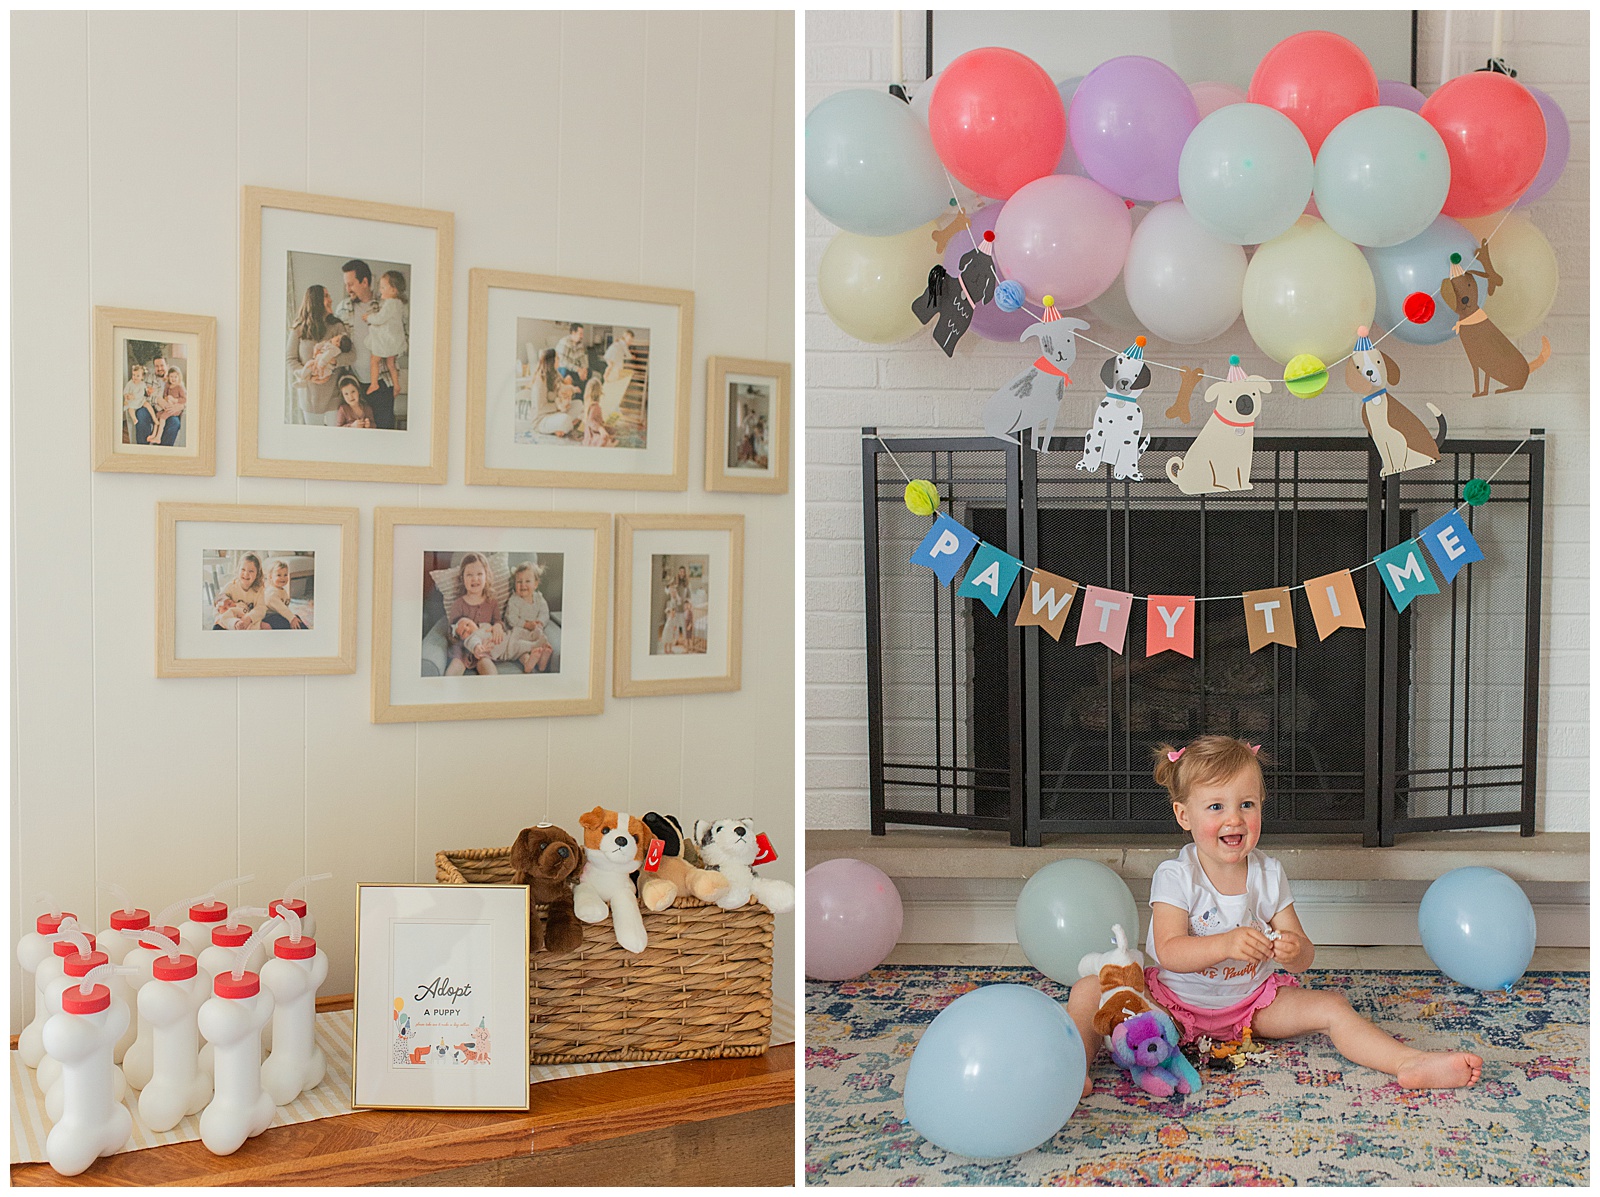 Dog themed birthday party | monicabrownphoto.com/blog